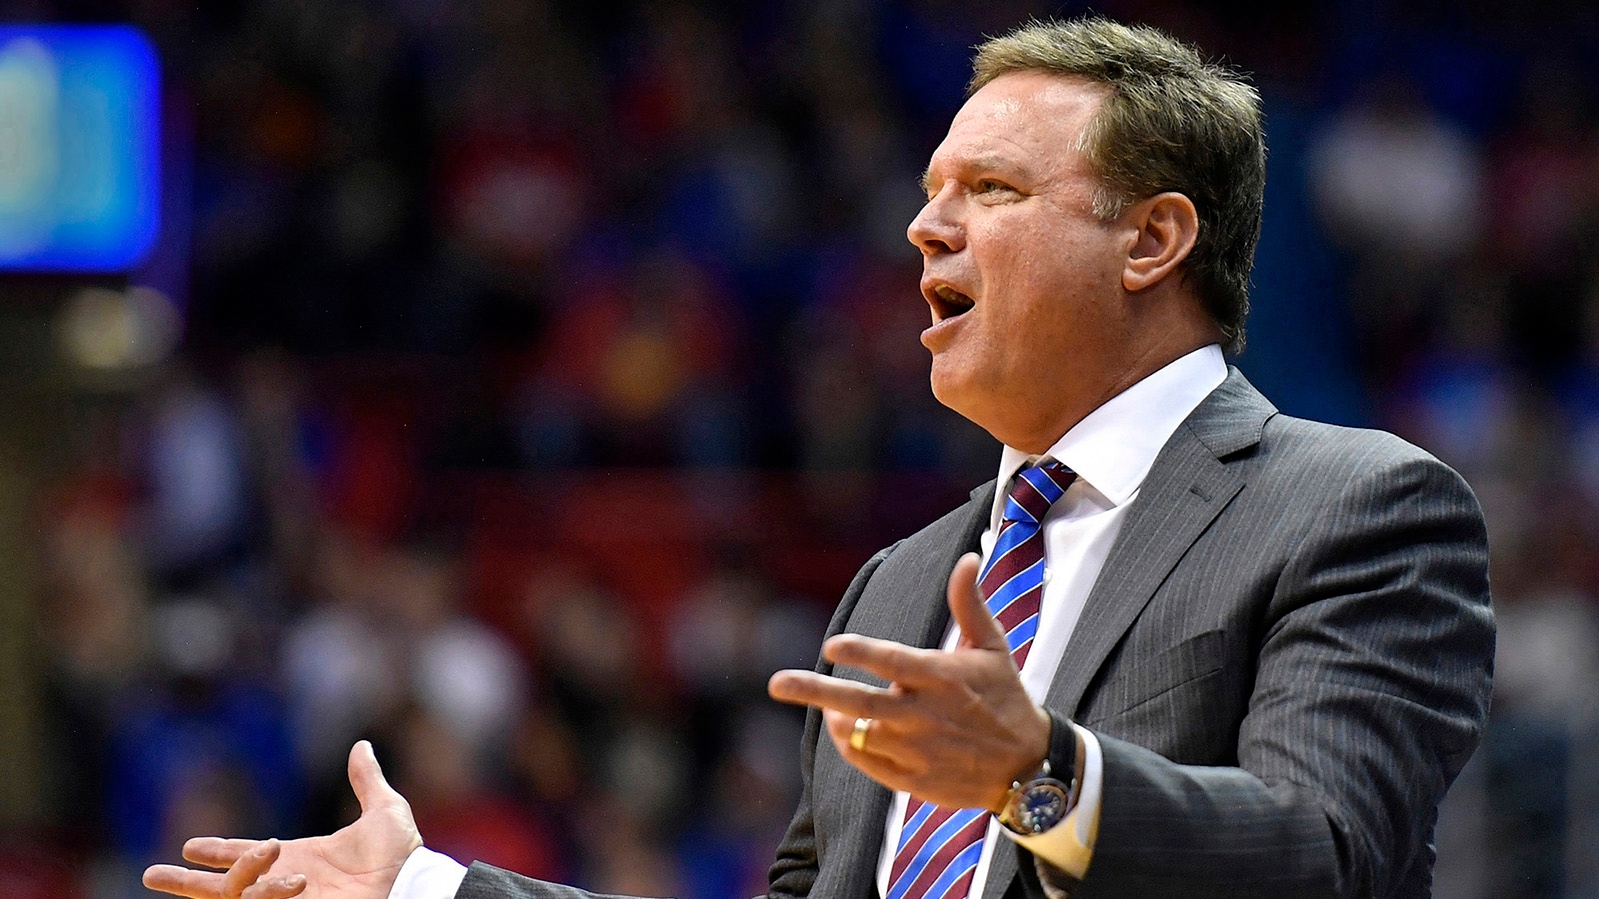 NCAA alleges Kansas committed 'egregious' and 'severe' violations